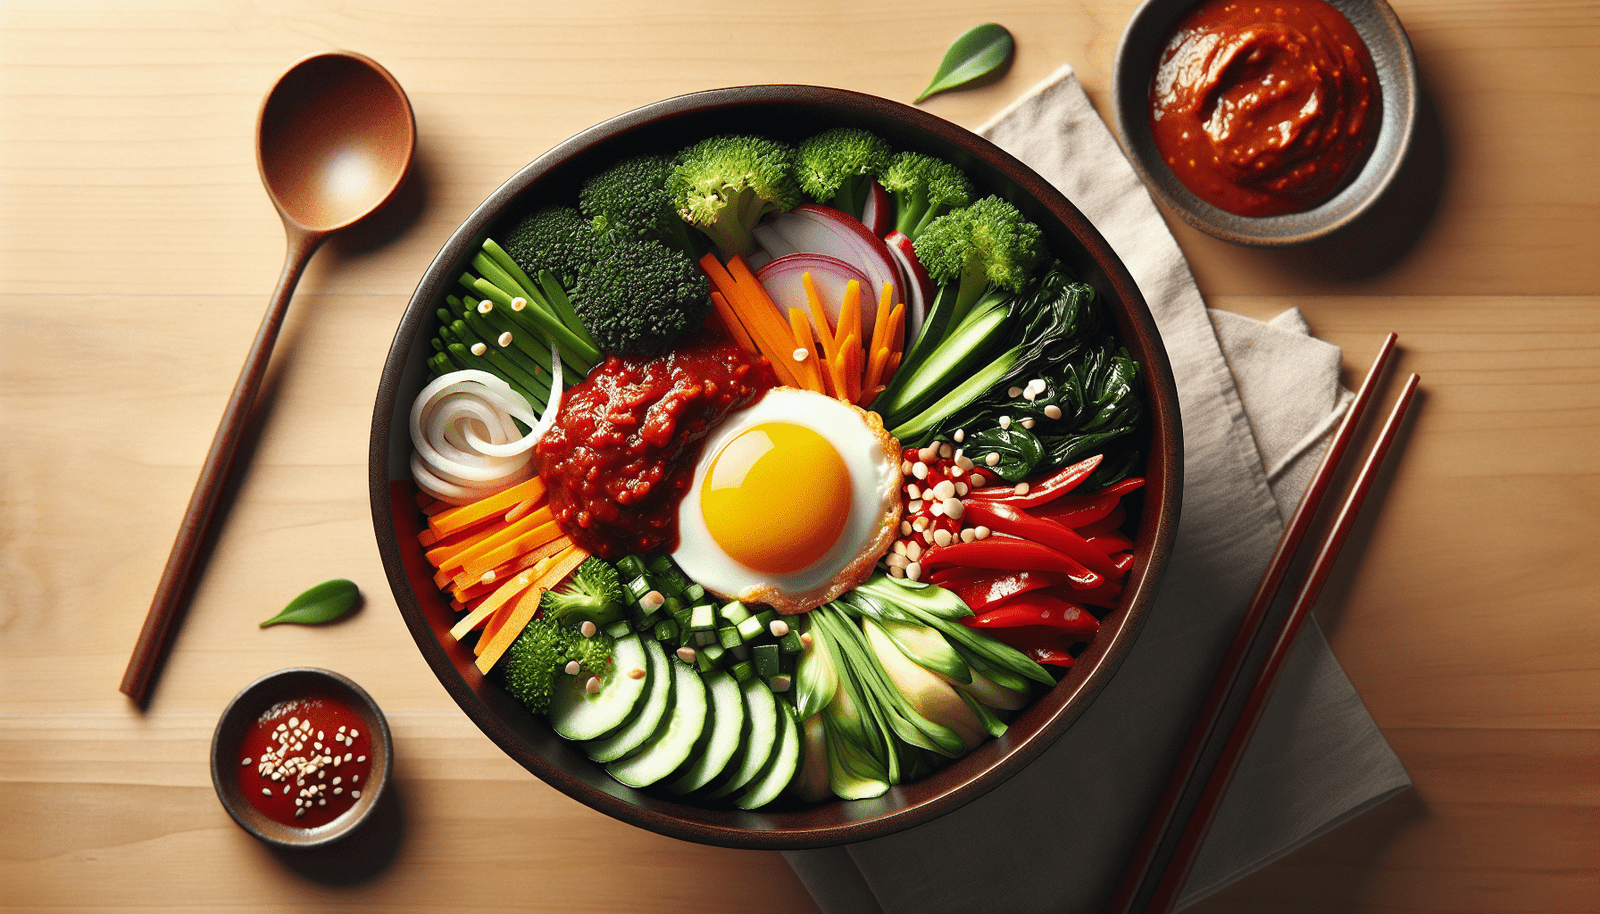 What Are Some Traditional Korean Dishes That Highlight The Use Of Gochujang (red Chili Paste)?